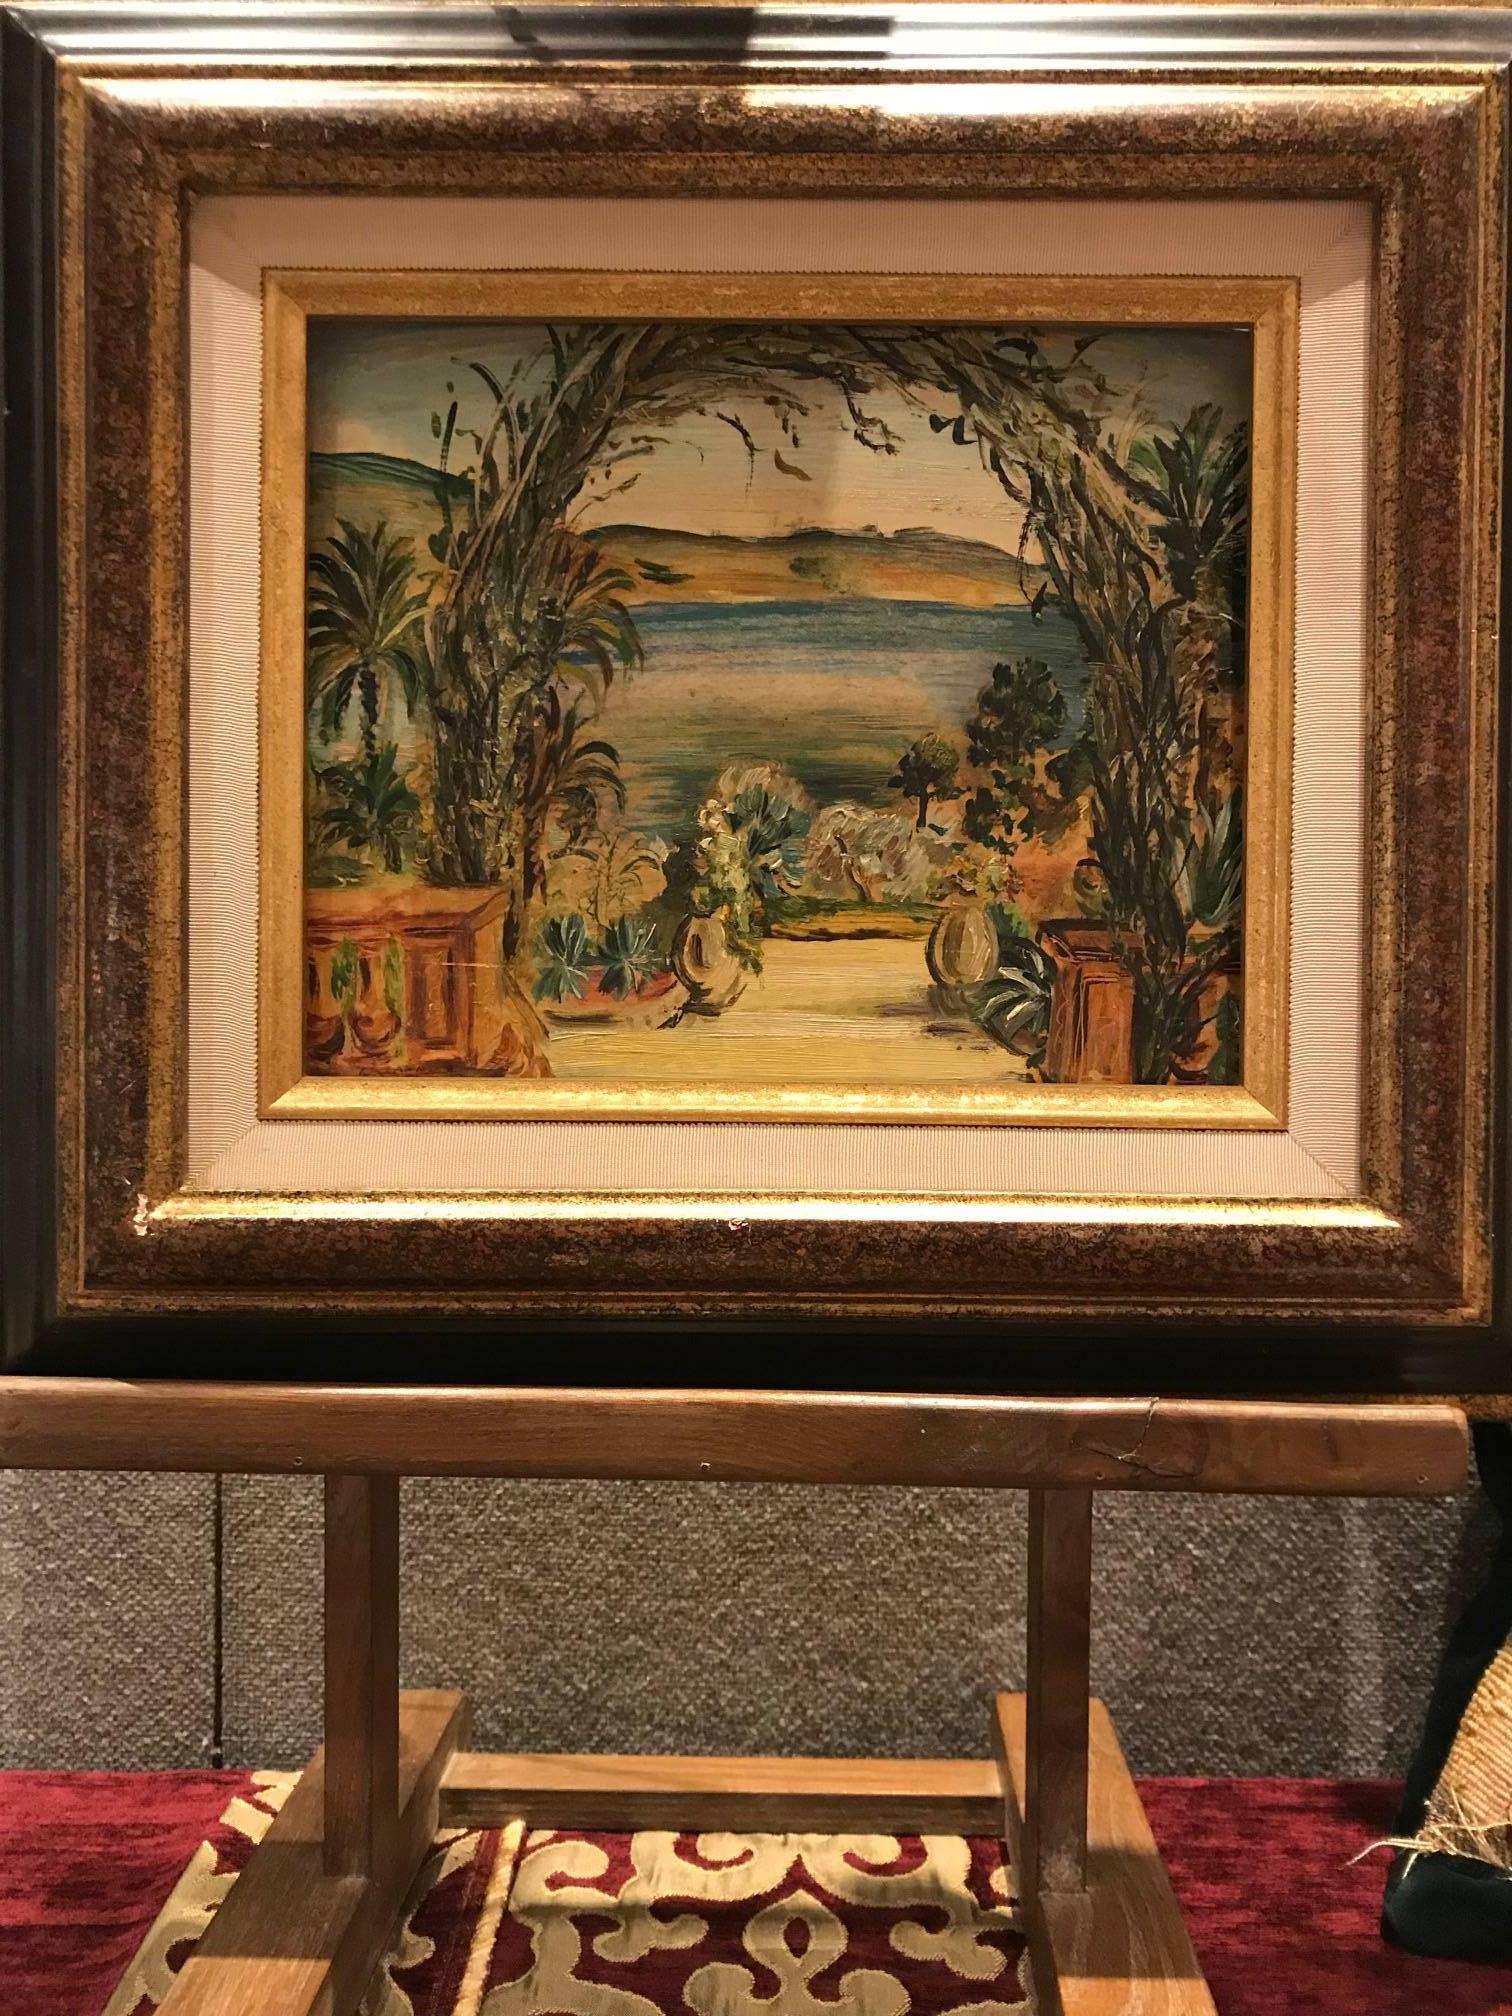 A small oil on board of a landscape probably the South of France by the French artist Cheriane.

Cheriane studied with Marie Laurencin at the Ecole des Beaux Arts and at the Academie Julian in Paris. She took part in the Salon des Artistes